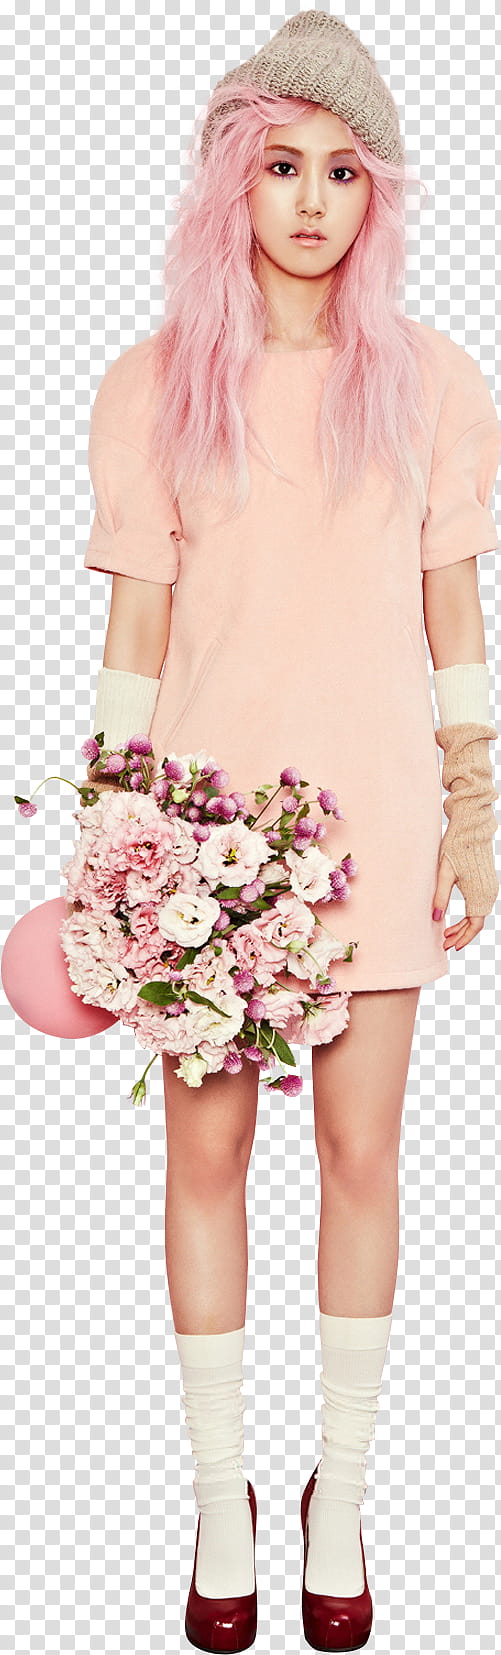 Gayoon Minute Render, girl holding flower with vase transparent background PNG clipart